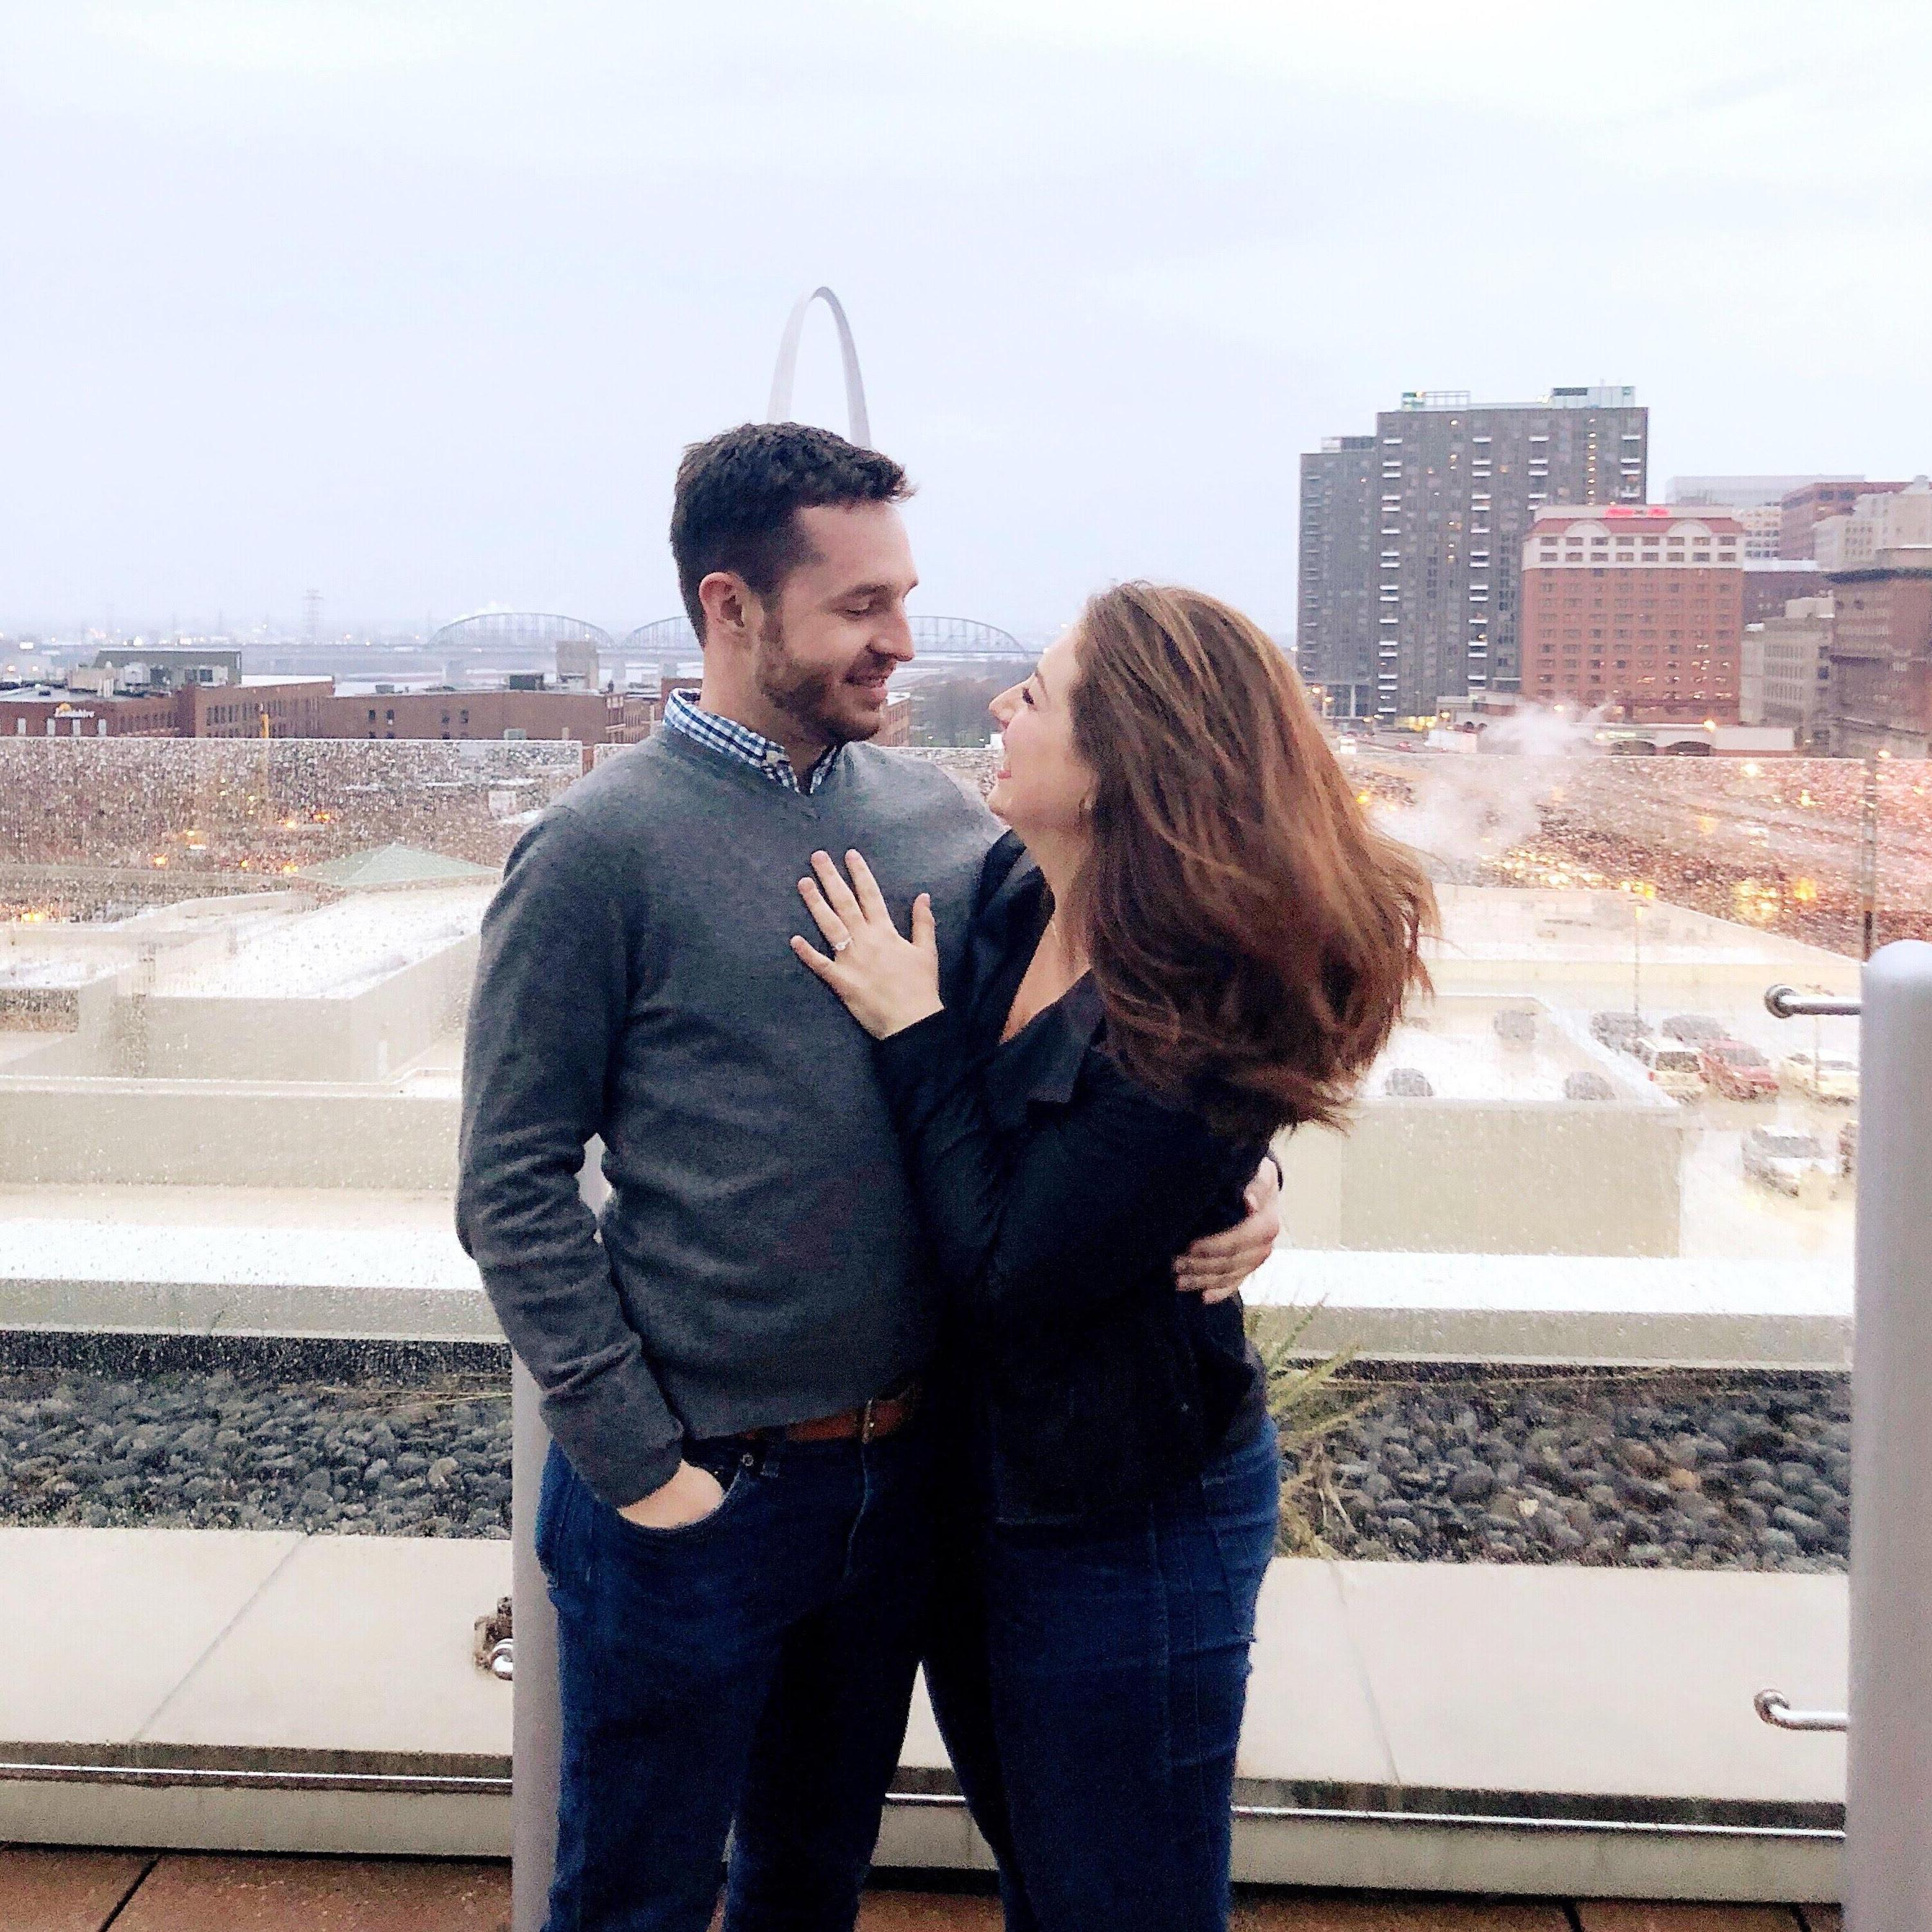 Matt proposed on March 23, 2018 at the Four Seasons. With our smiles you would have no idea it was cold and raining. It was the perfect day.